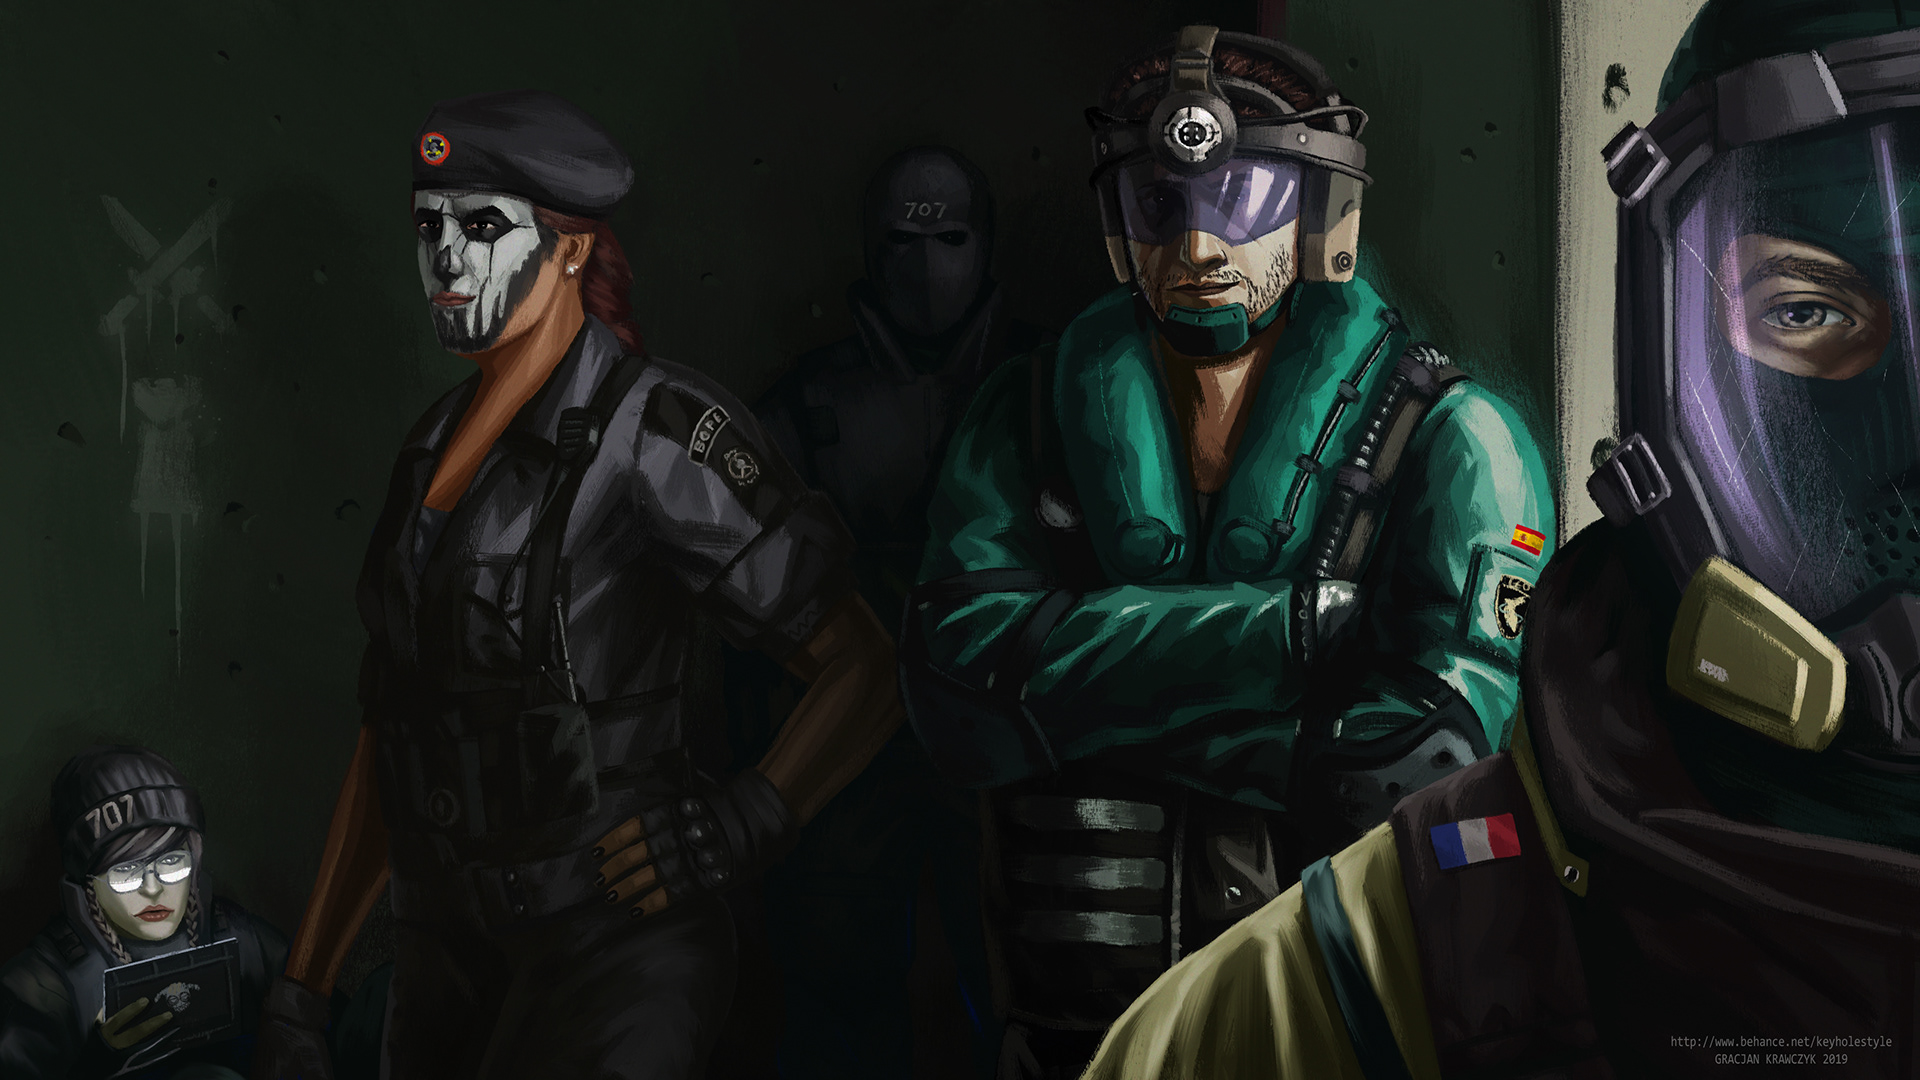 12. ILLUSTRATIONS mostly inspired by RAINBOW SIX SIEGE. 